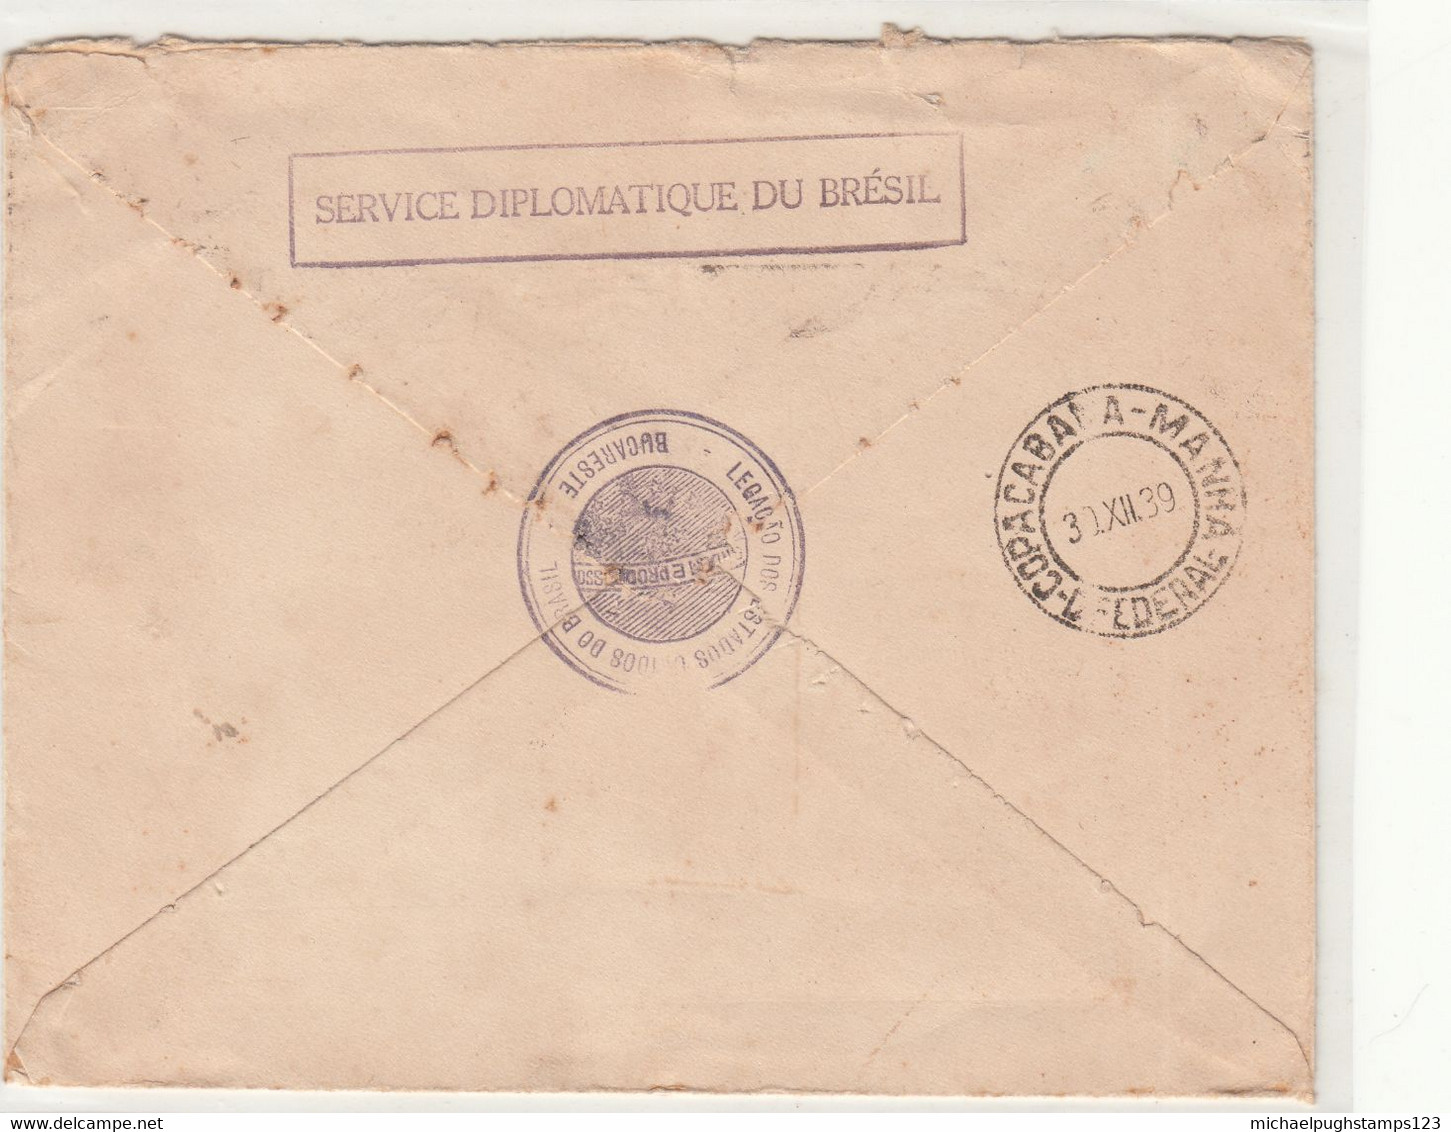 Romania / Diplomatic Mail / Brazil - Officials